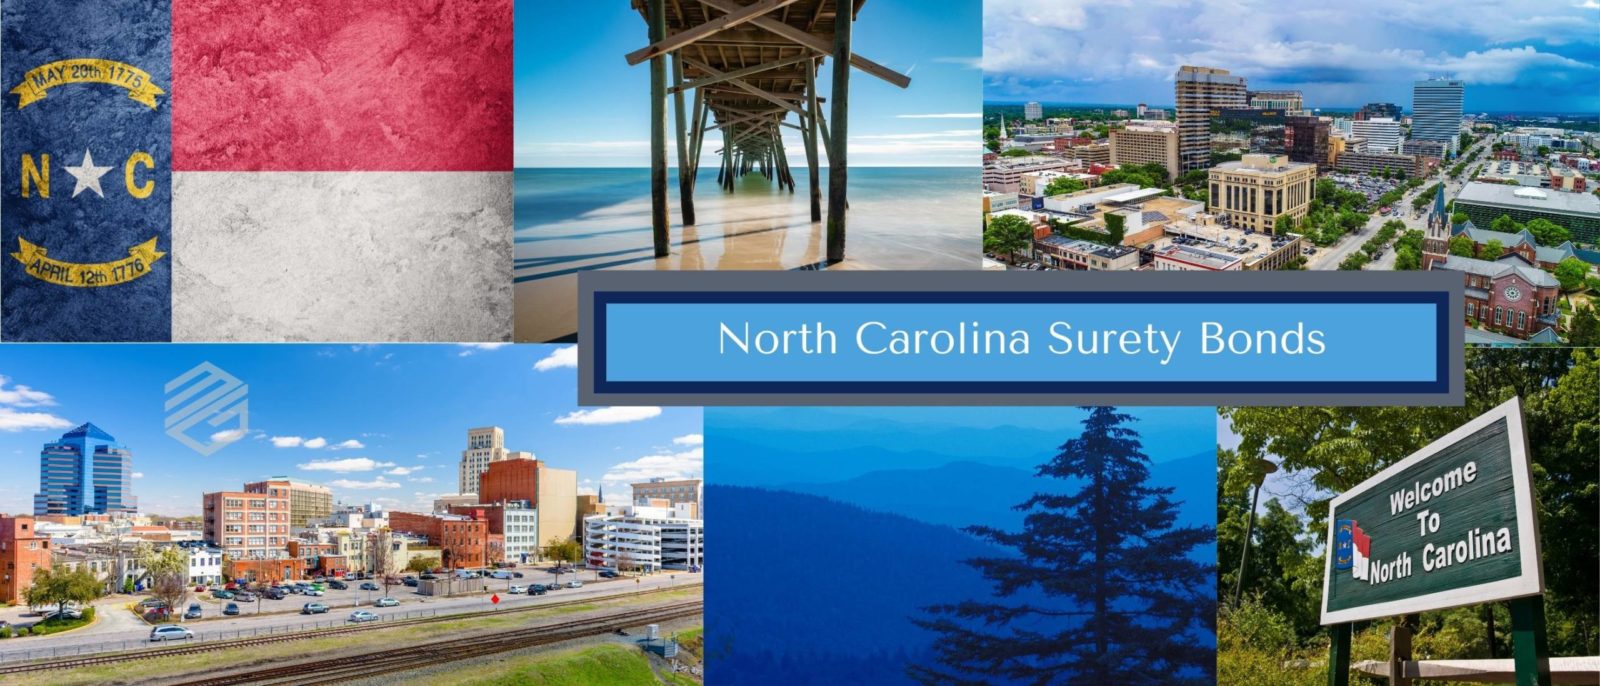 North Carolina Surety Bonds - This is 6 pictures representing North Carolina including Charlotte, Raleigh, the state flag. A text box in the middle reads, "North Carolina Surety Bonds".